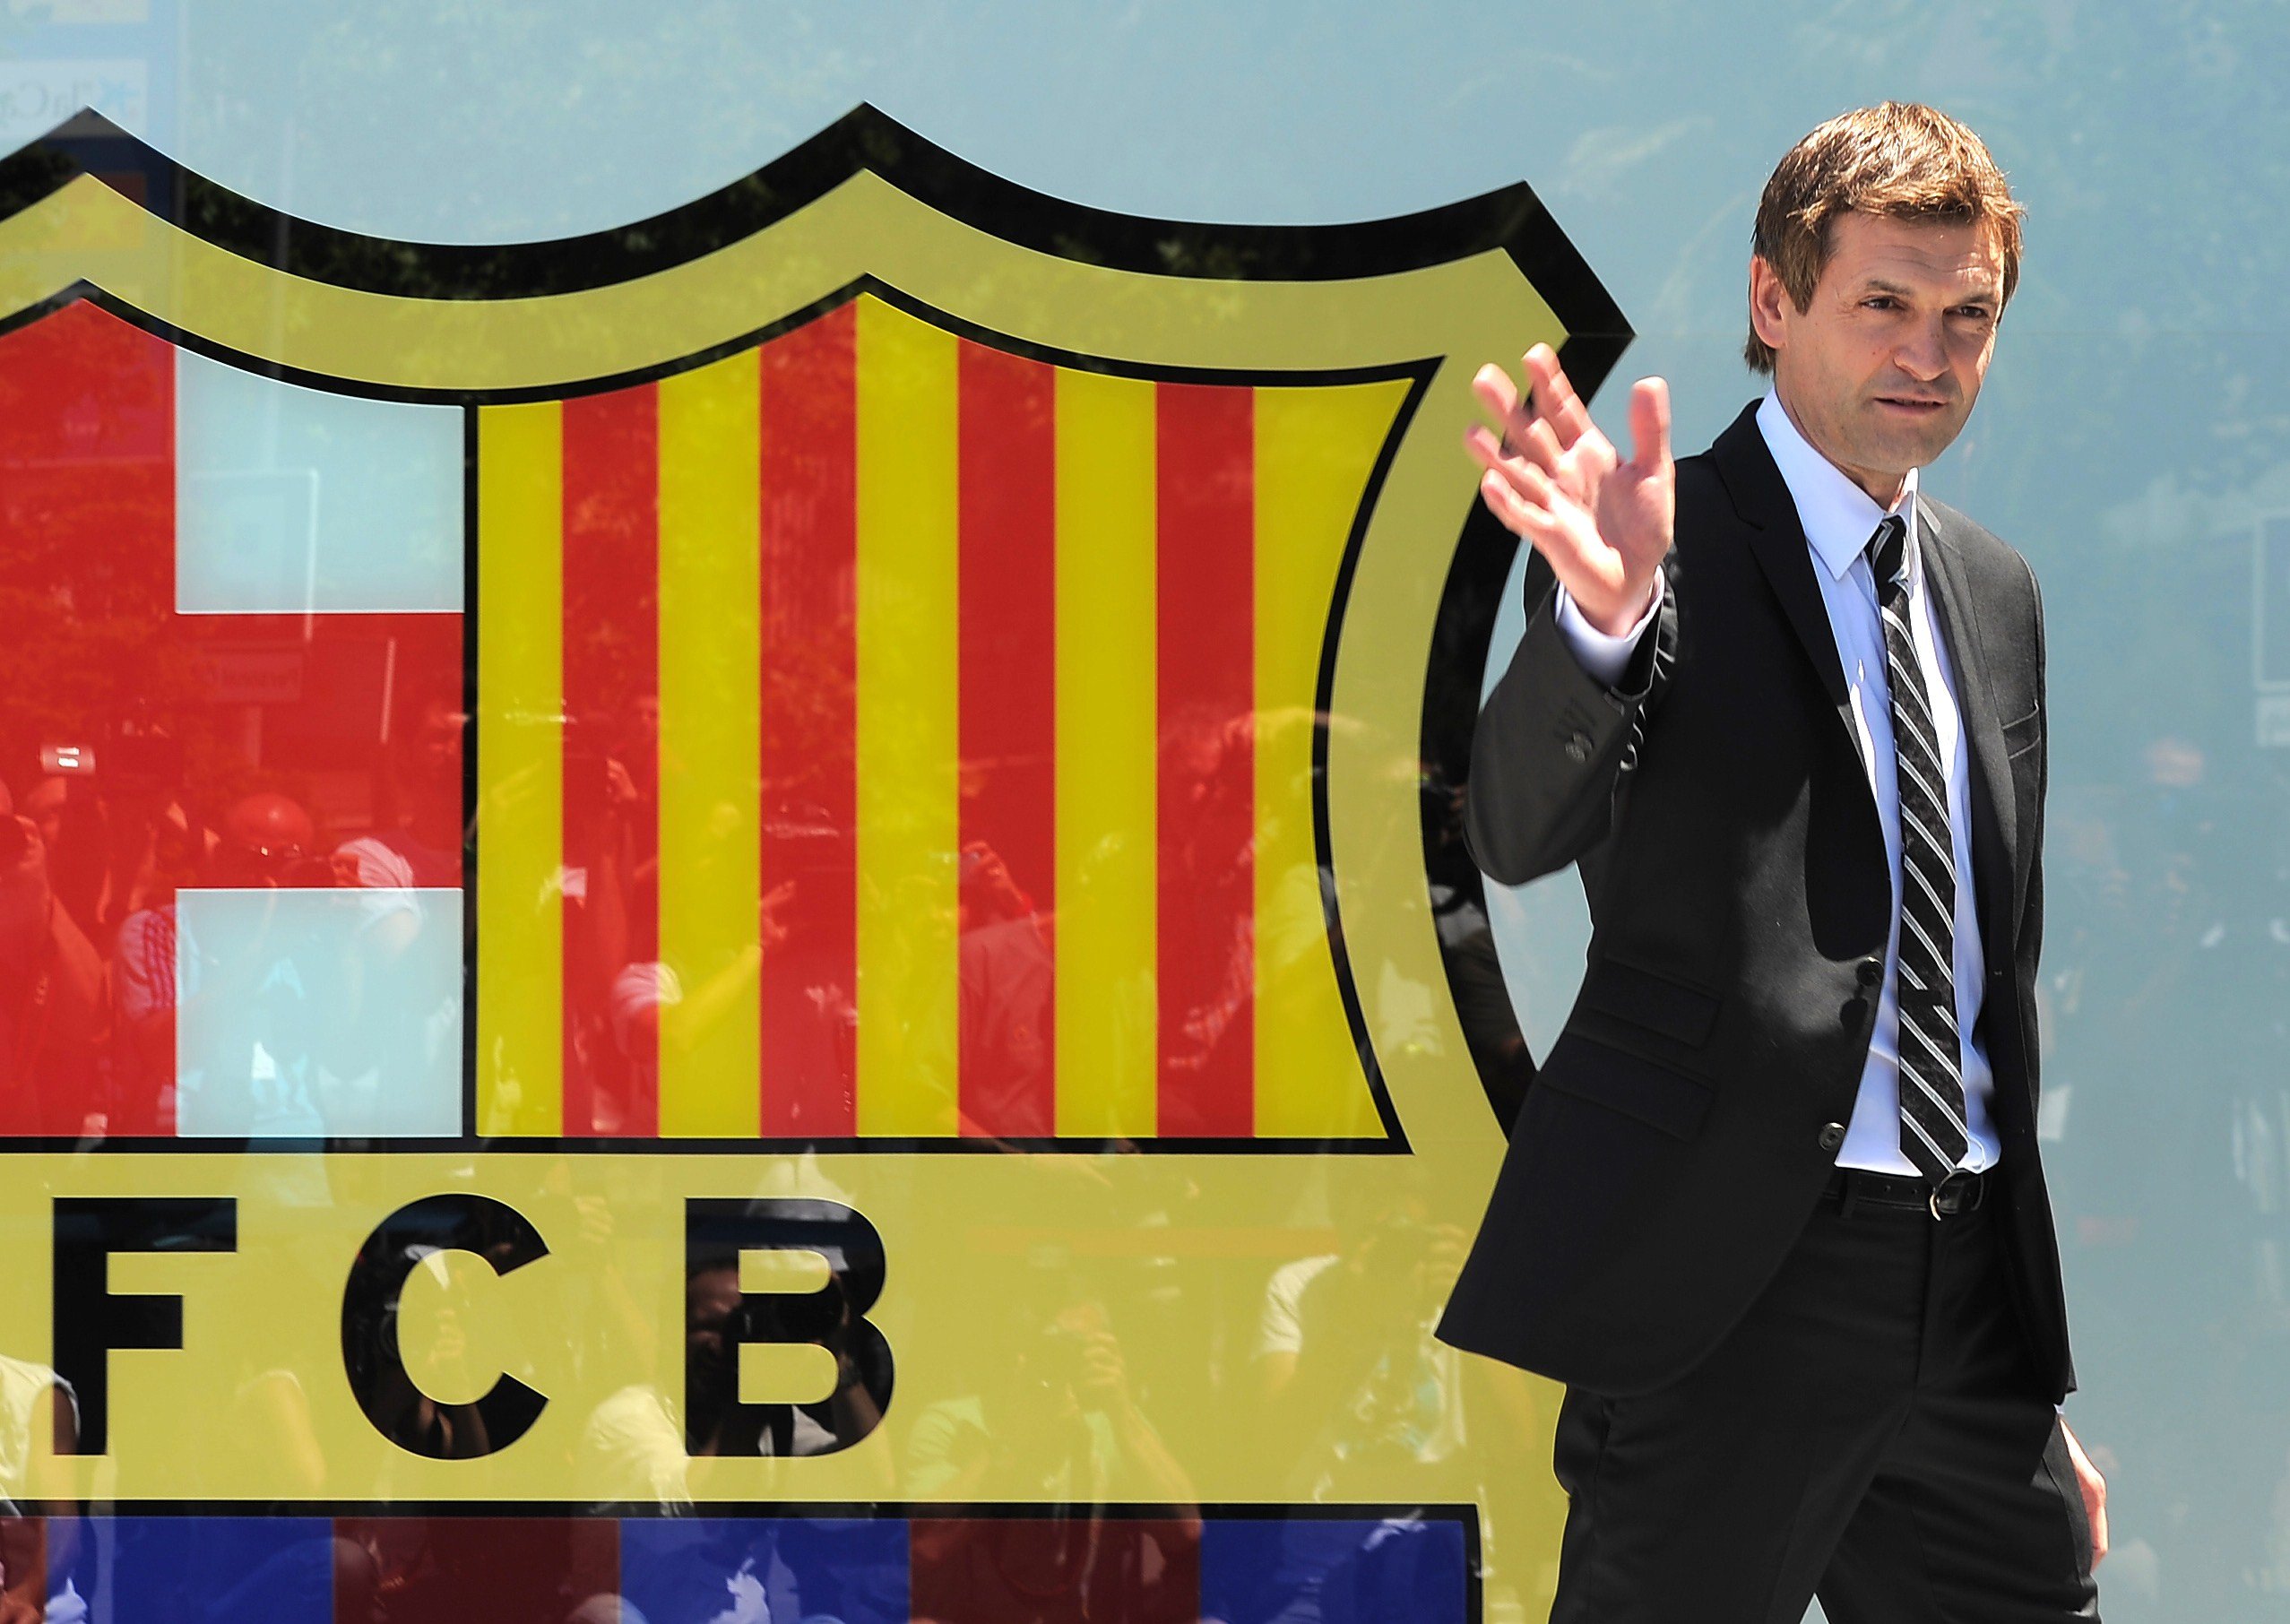 Former FC Barcelona football coach Tito Vilanova waving after signing his contract during a presentation at the Camp Nou in Barcelona.  